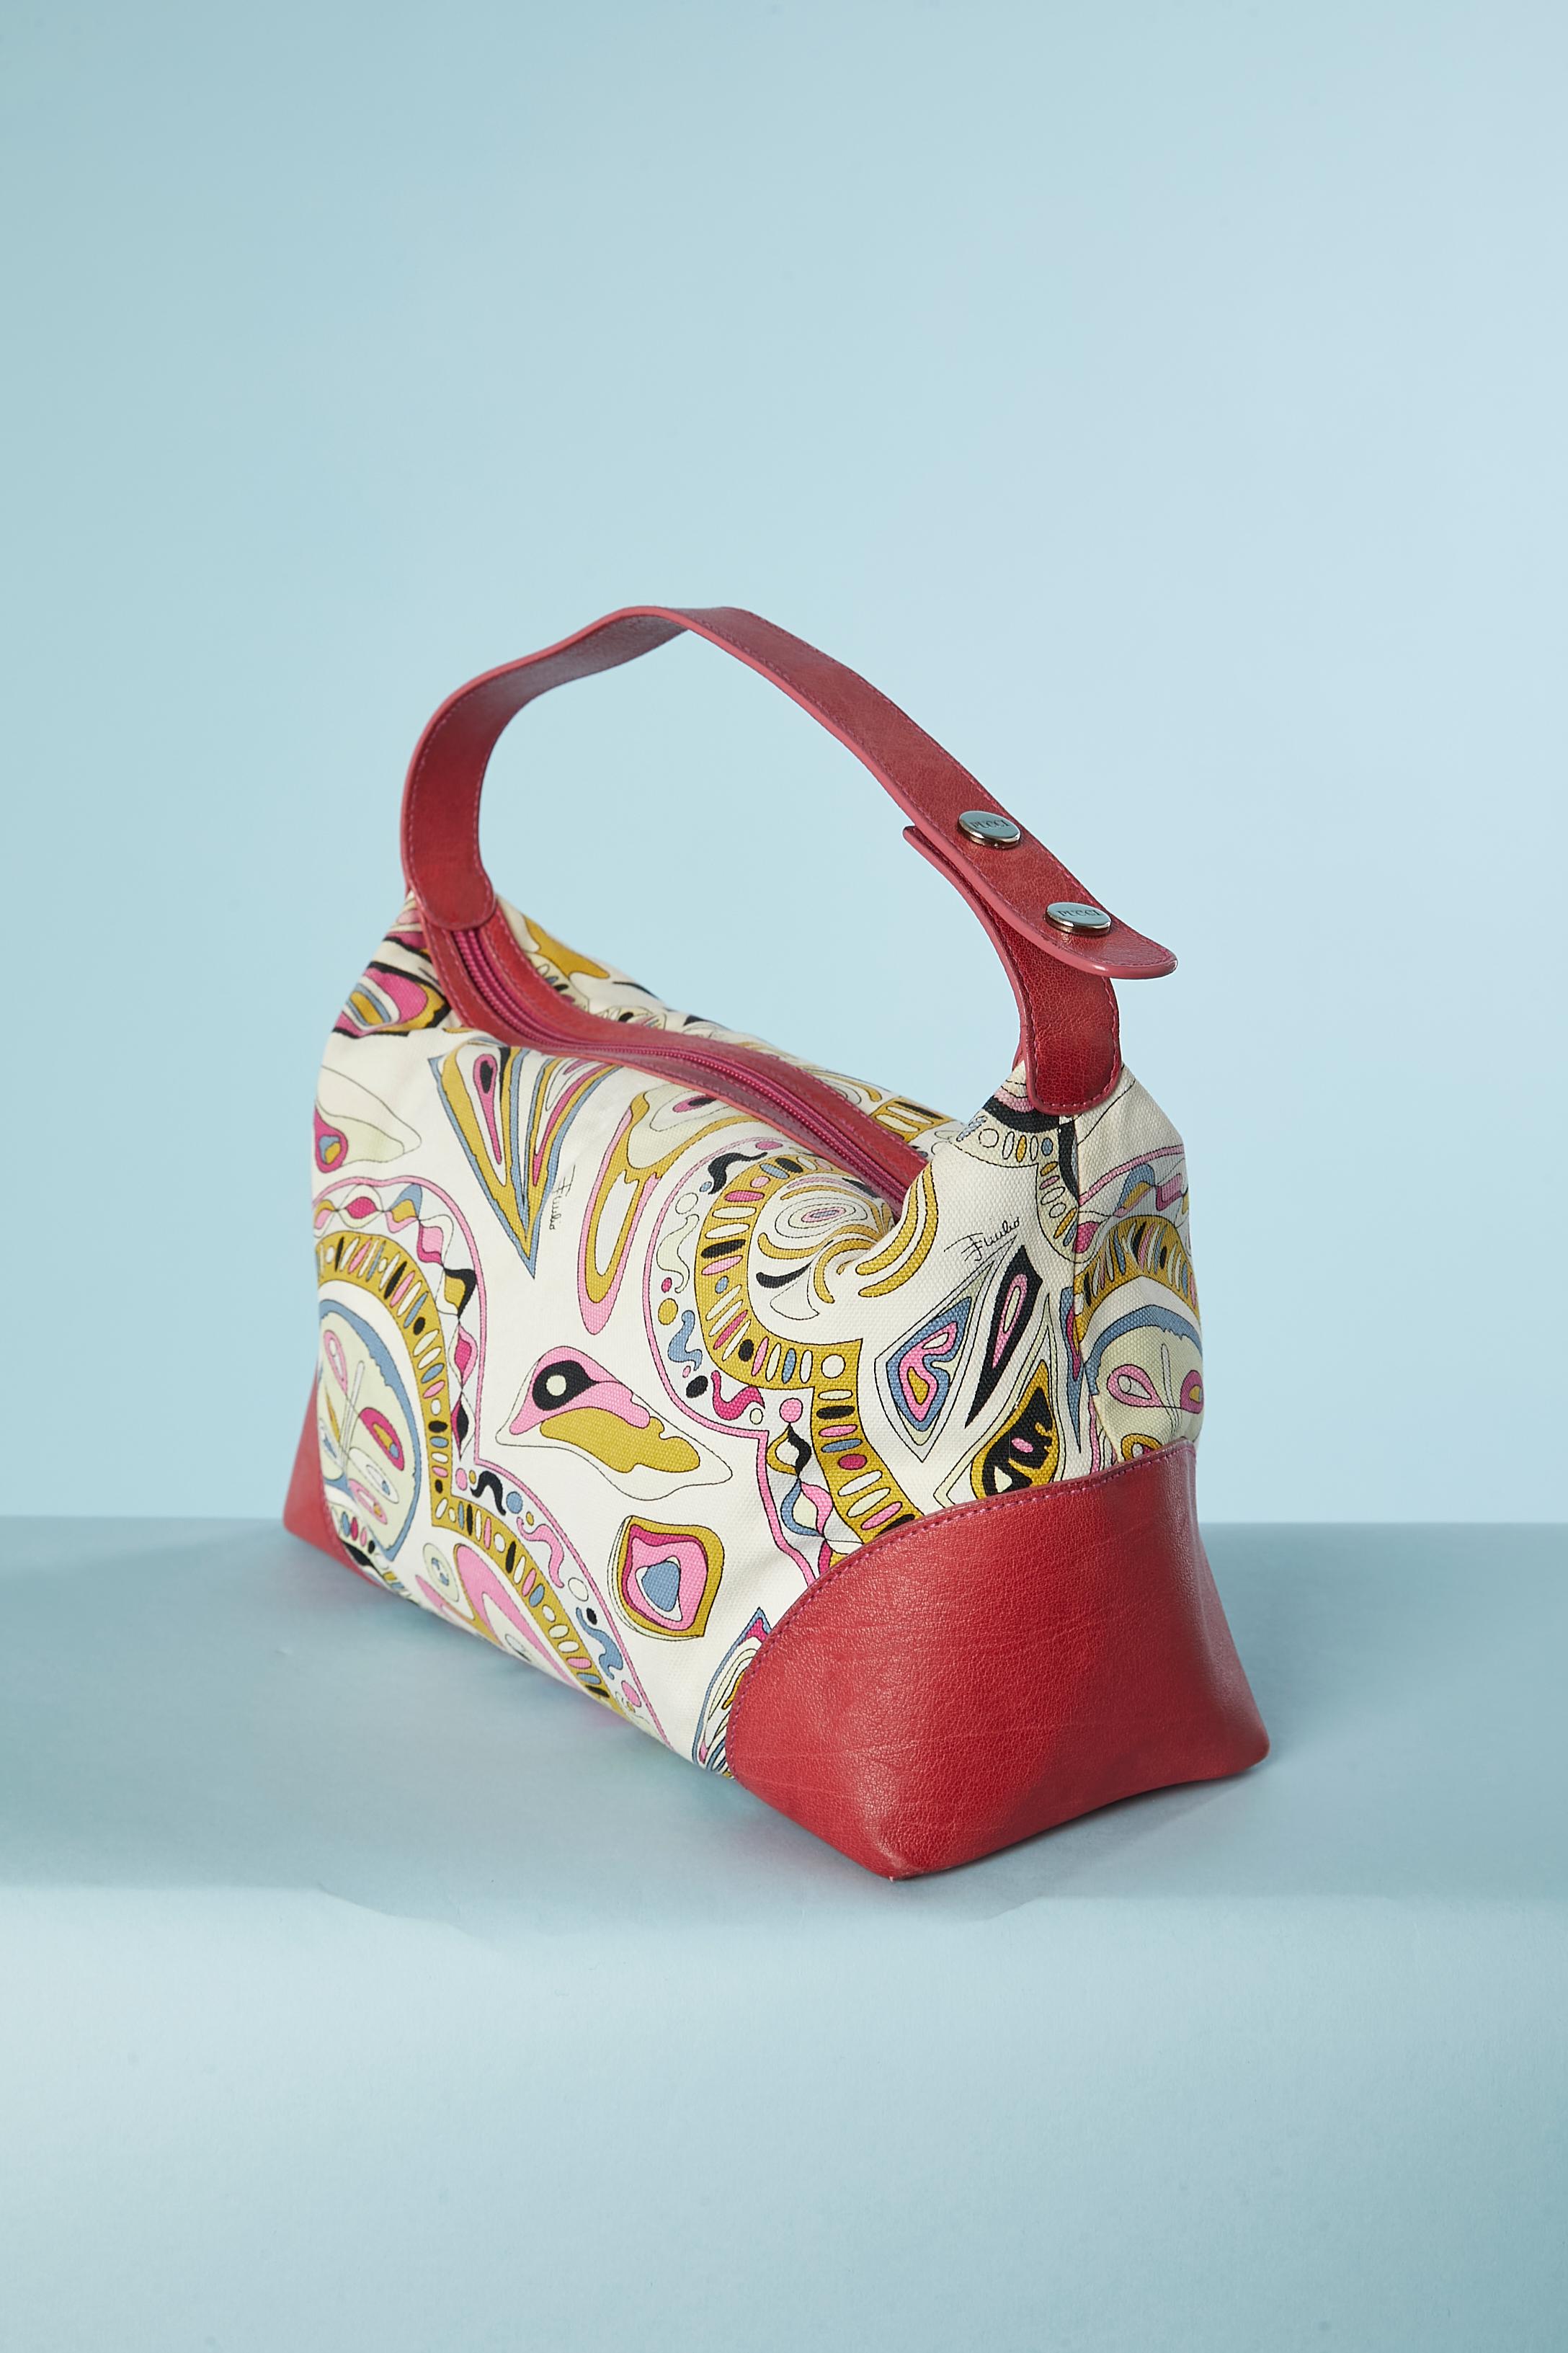 Printed canevas and red leather handbag Emilio PUCCI  For Sale 1